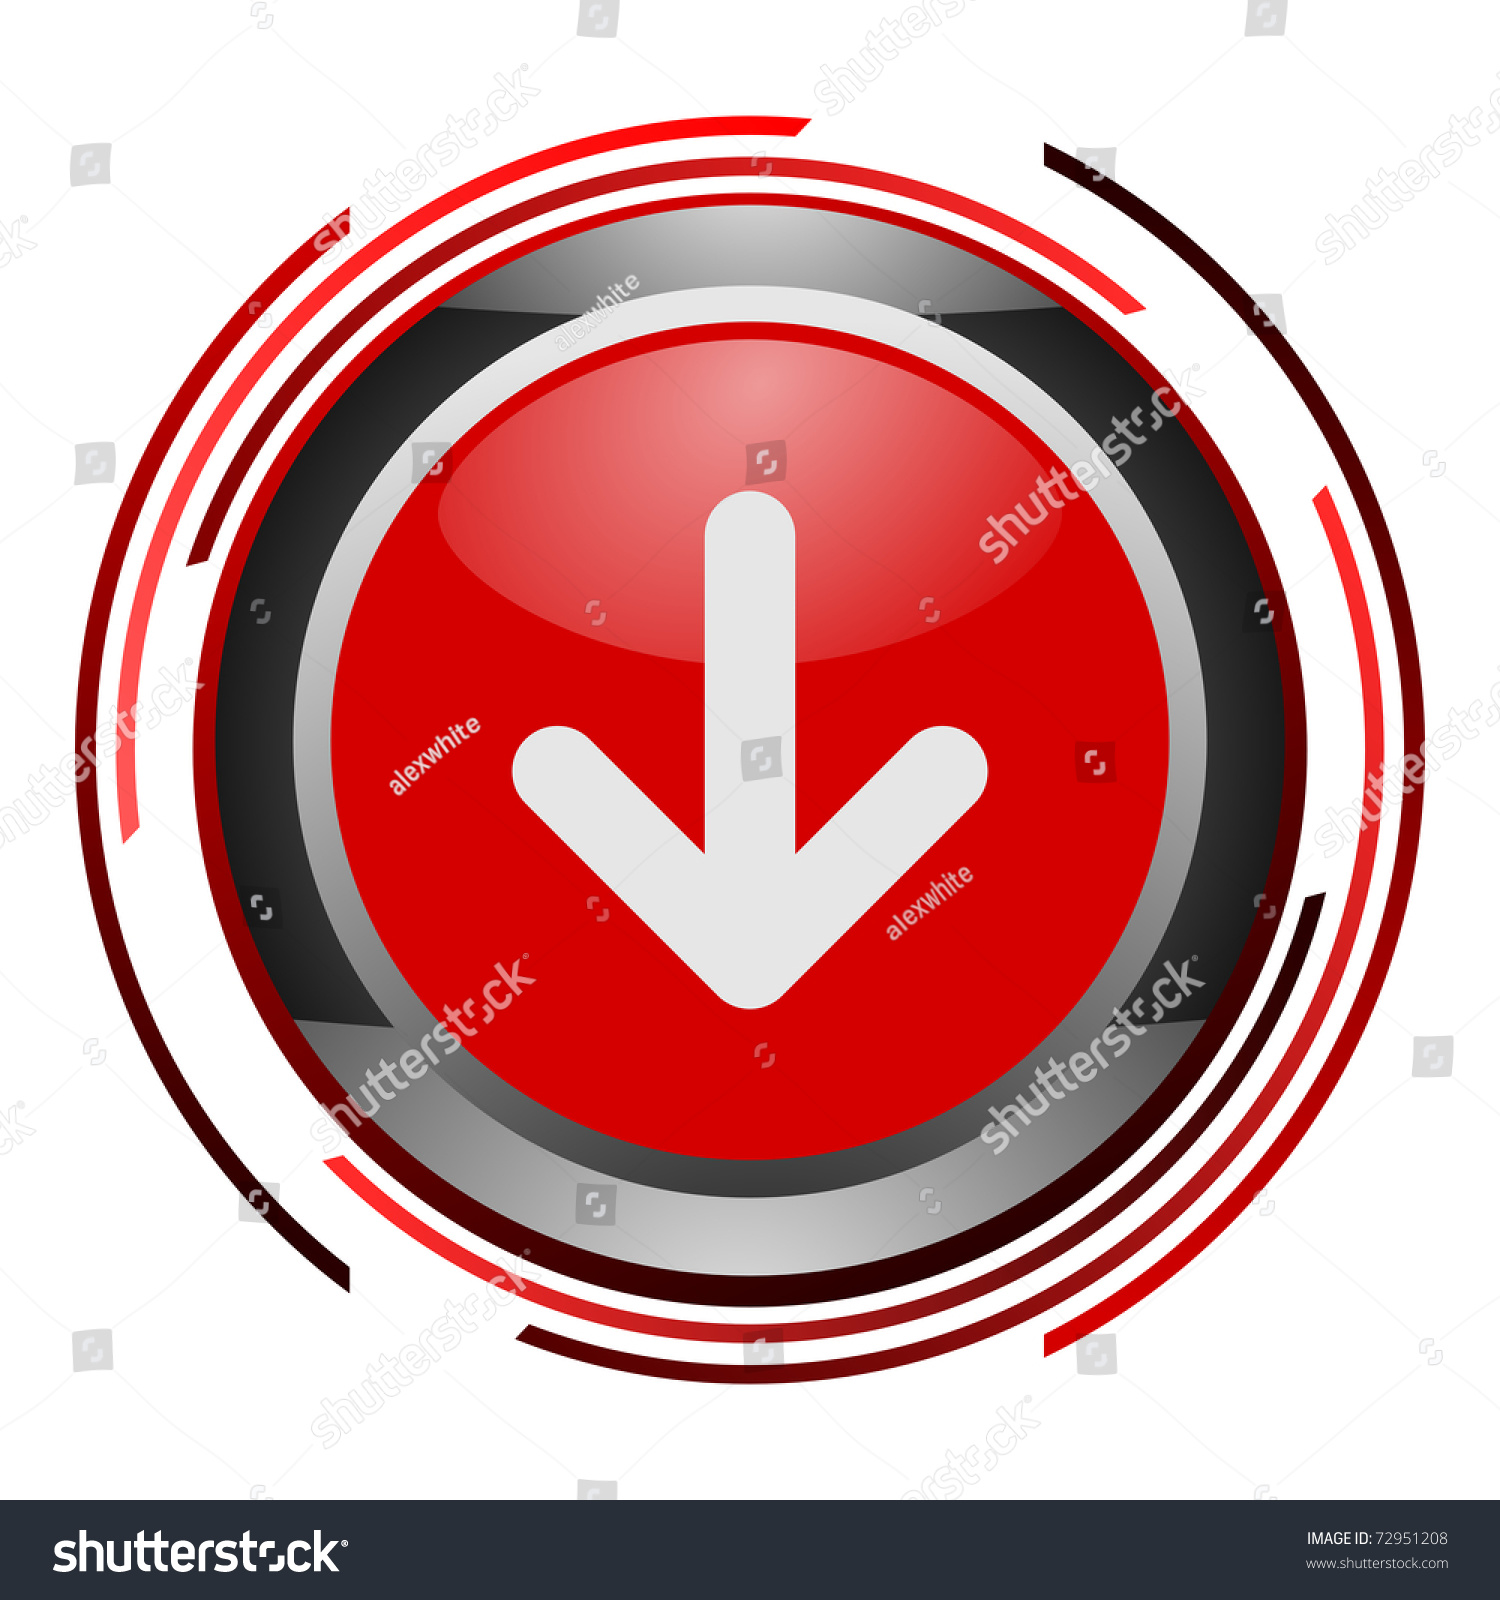 Red Glossy Arrow Button Stock Photo 72951208 : Shutterstock